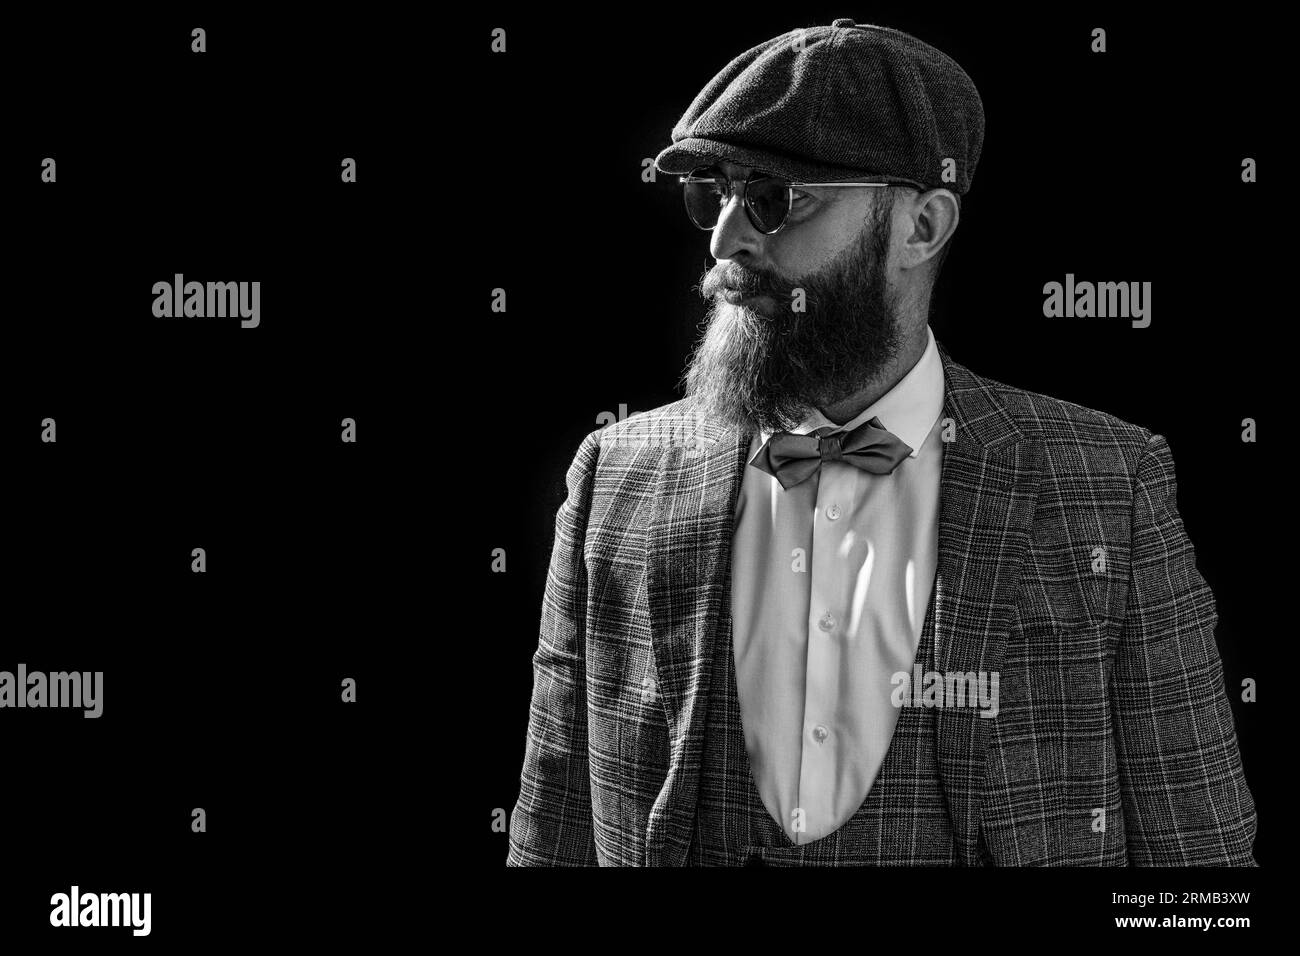 Peaky Black and White Stock Photos & Images - Alamy